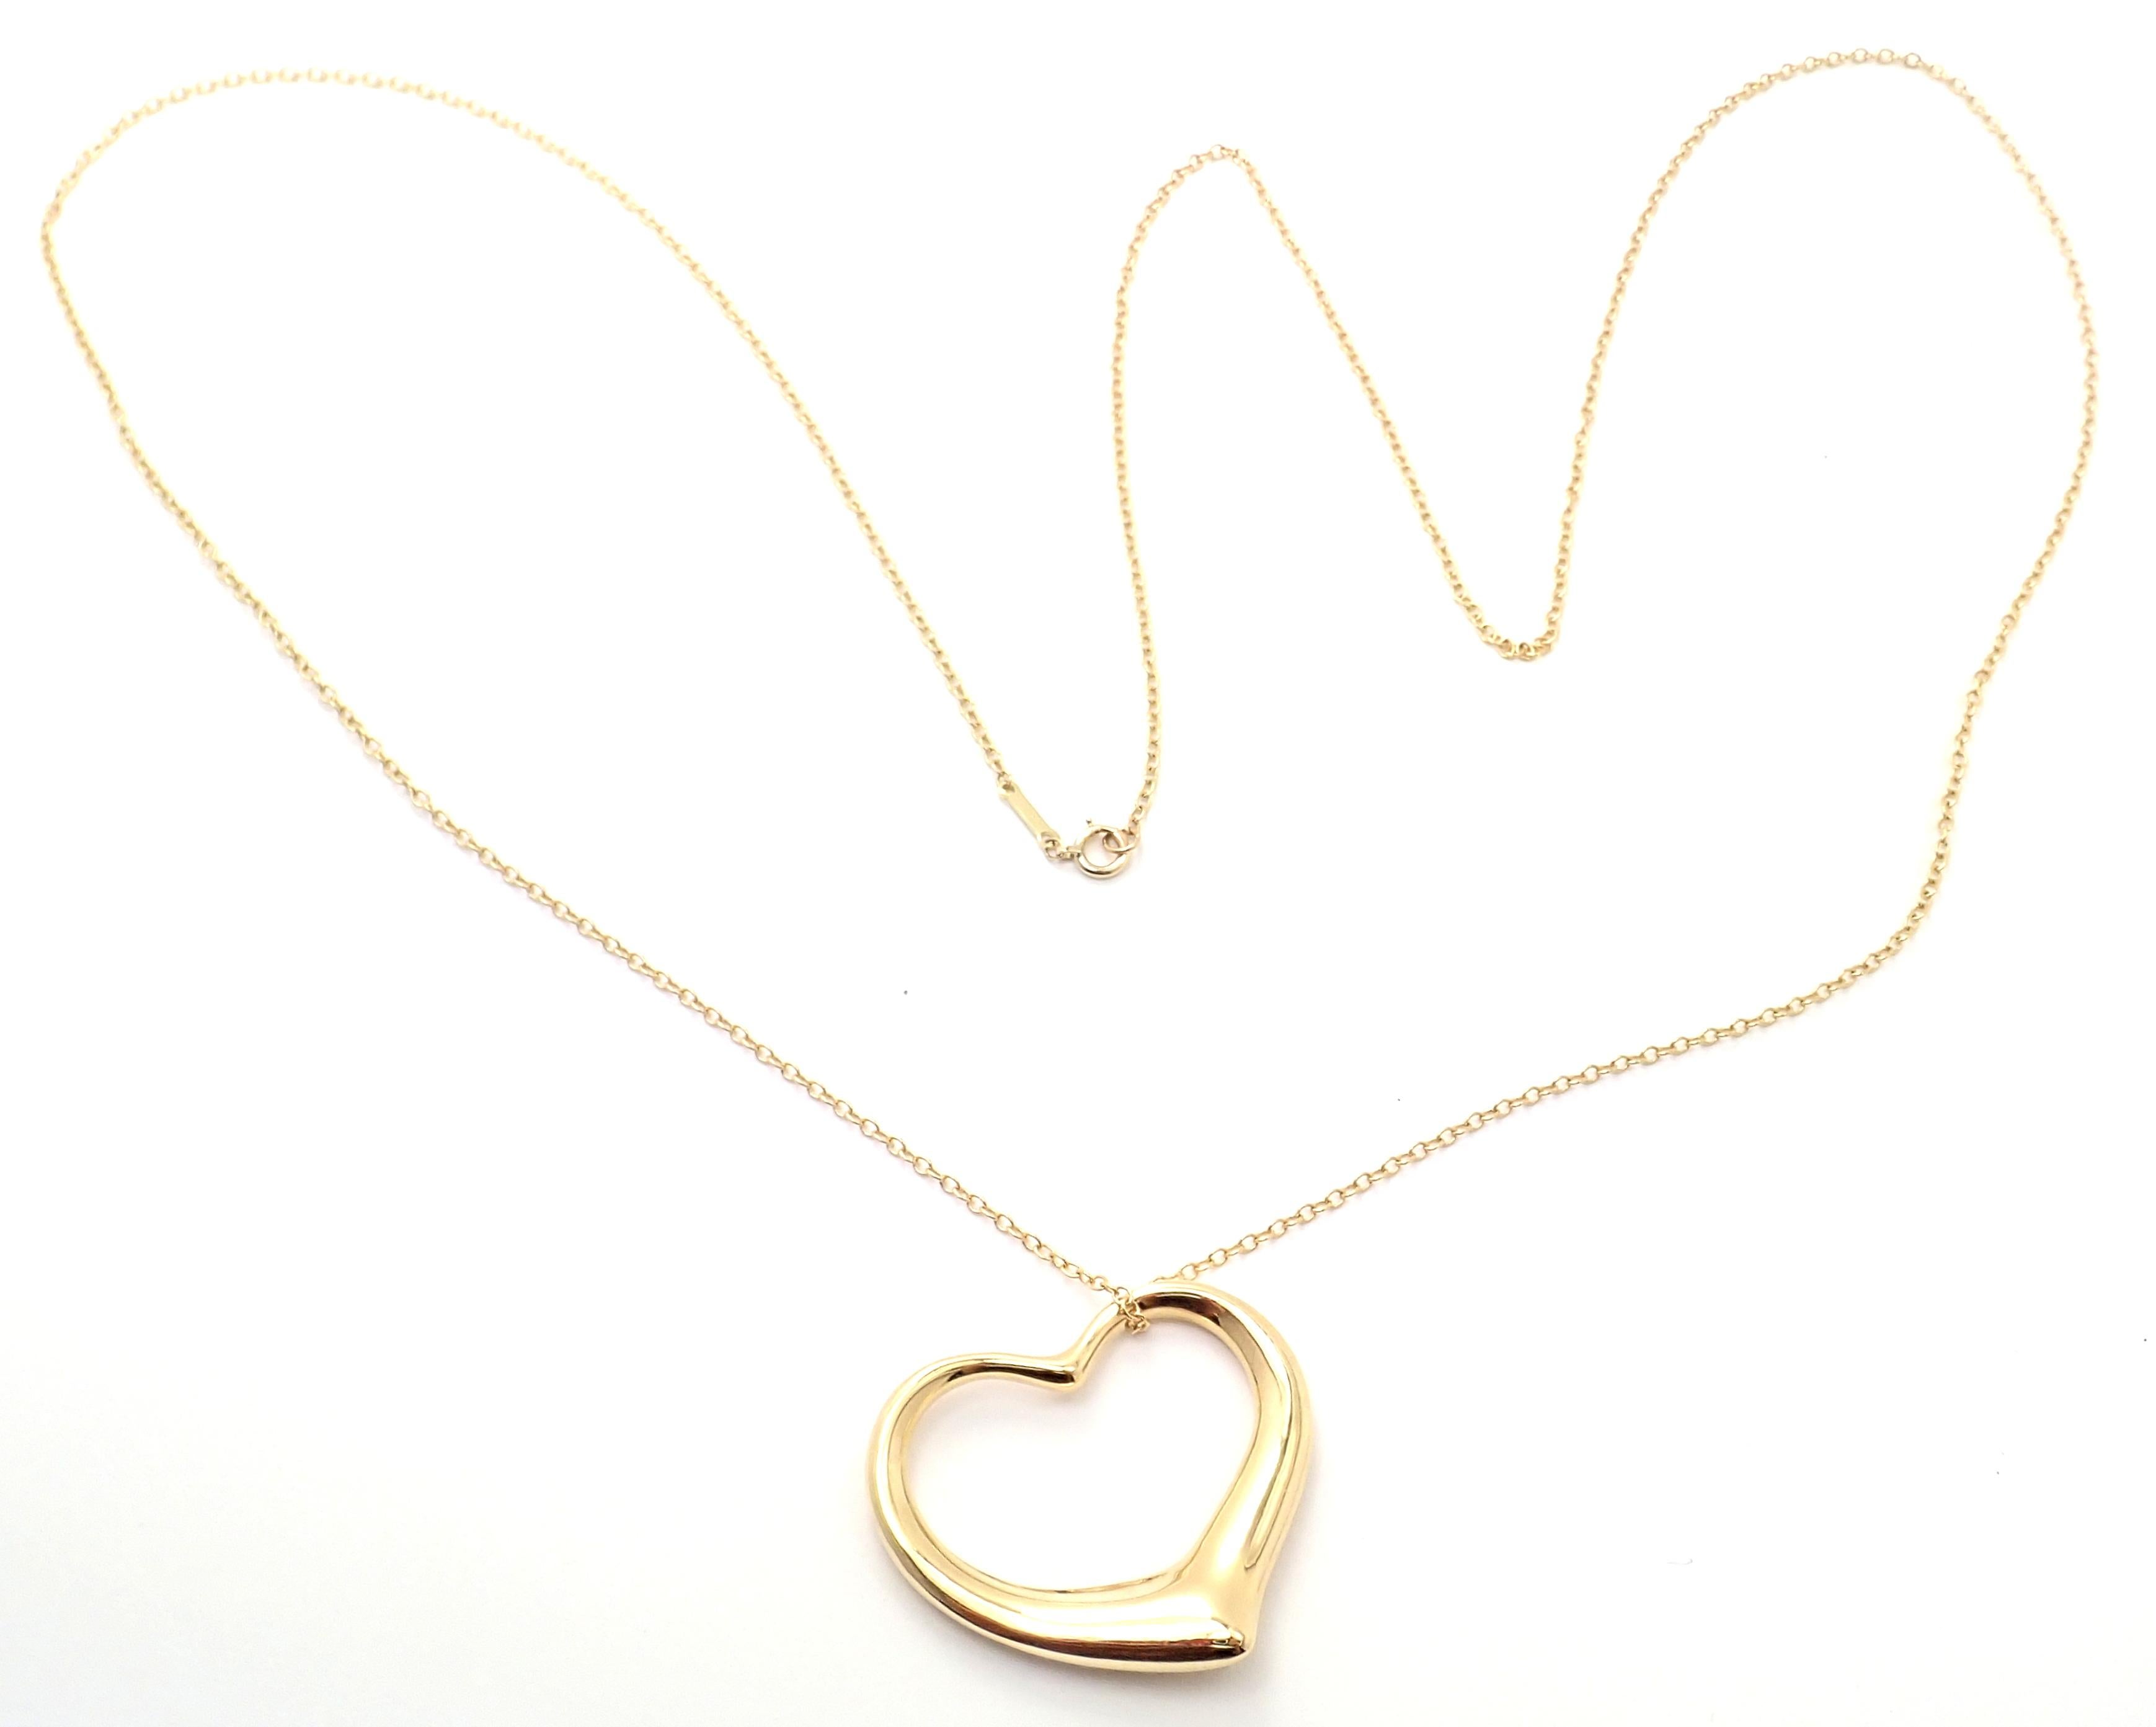 Tiffany & Co. Peretti Extra Large Open Heart Yellow Gold Pendant Necklace For Sale 3